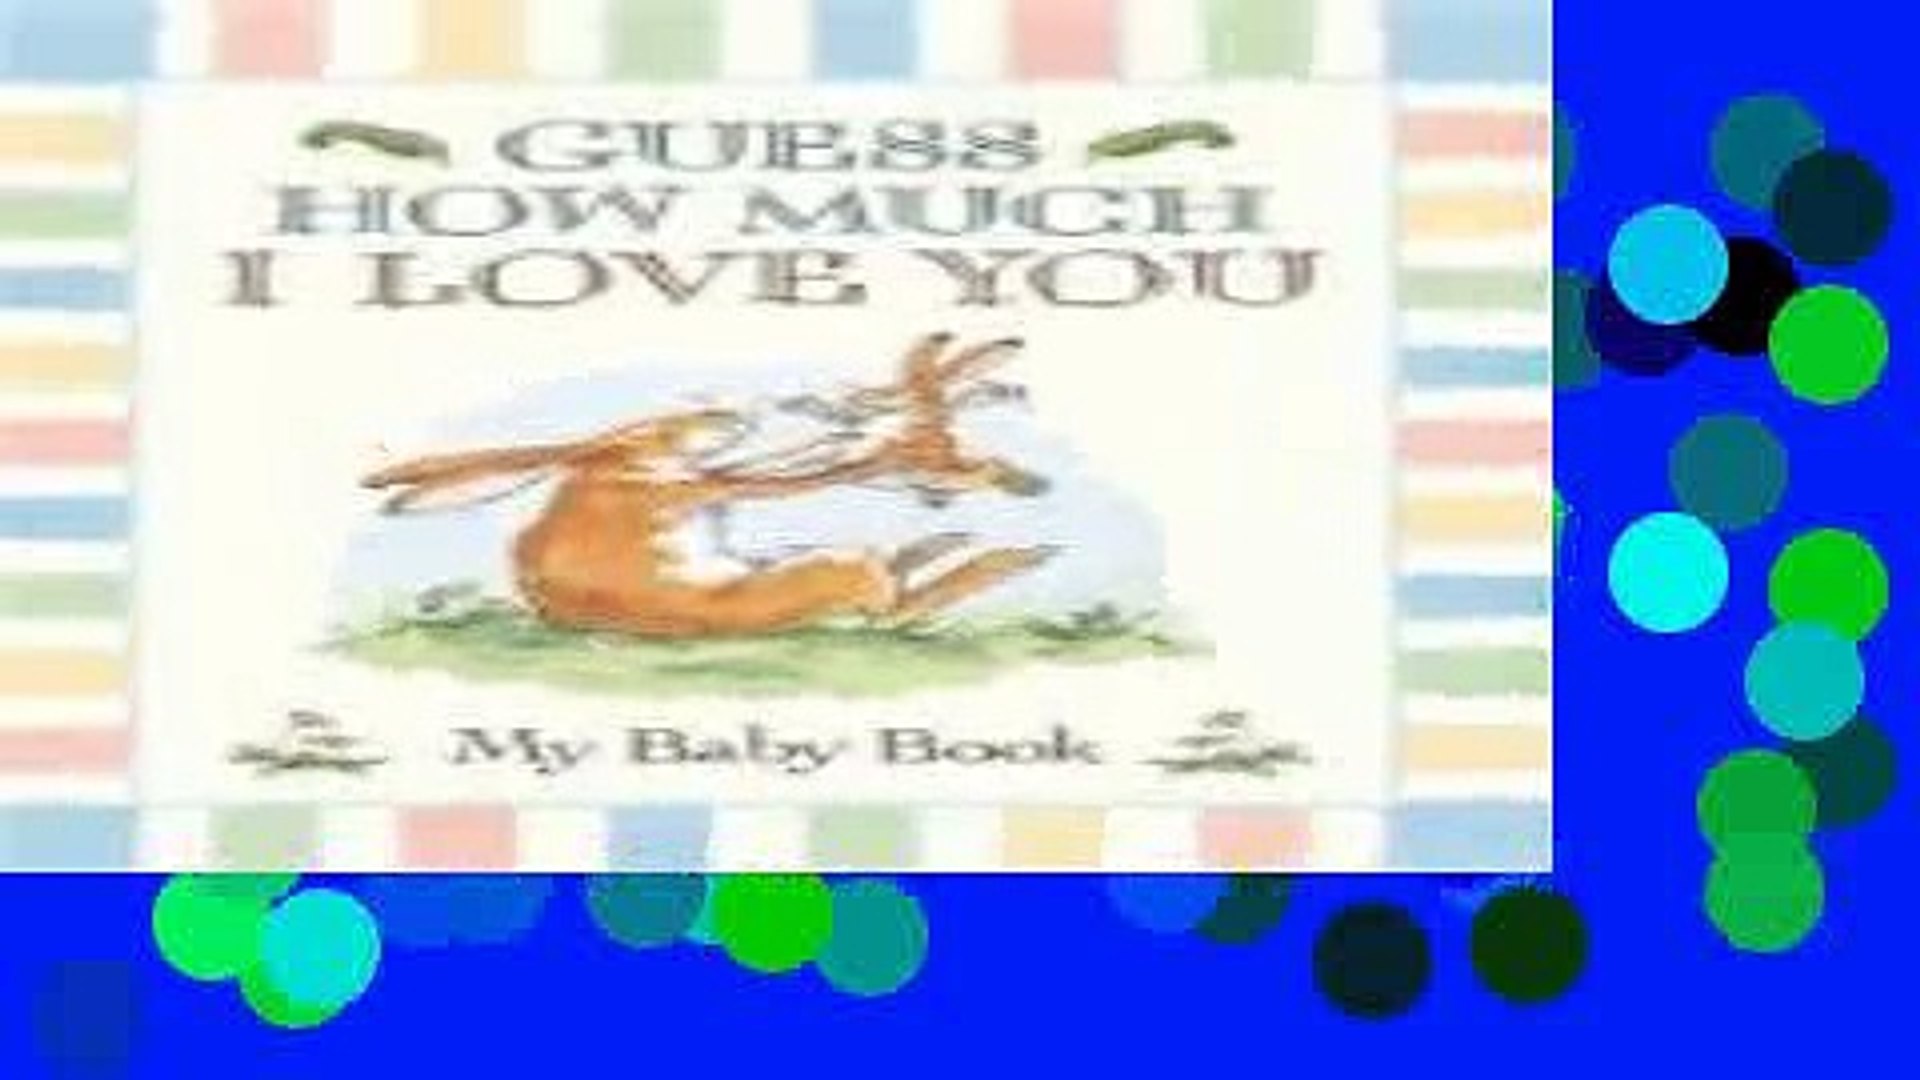 Download Guess How Much I Love You: My Baby Book Ebook Online - video  dailymotion